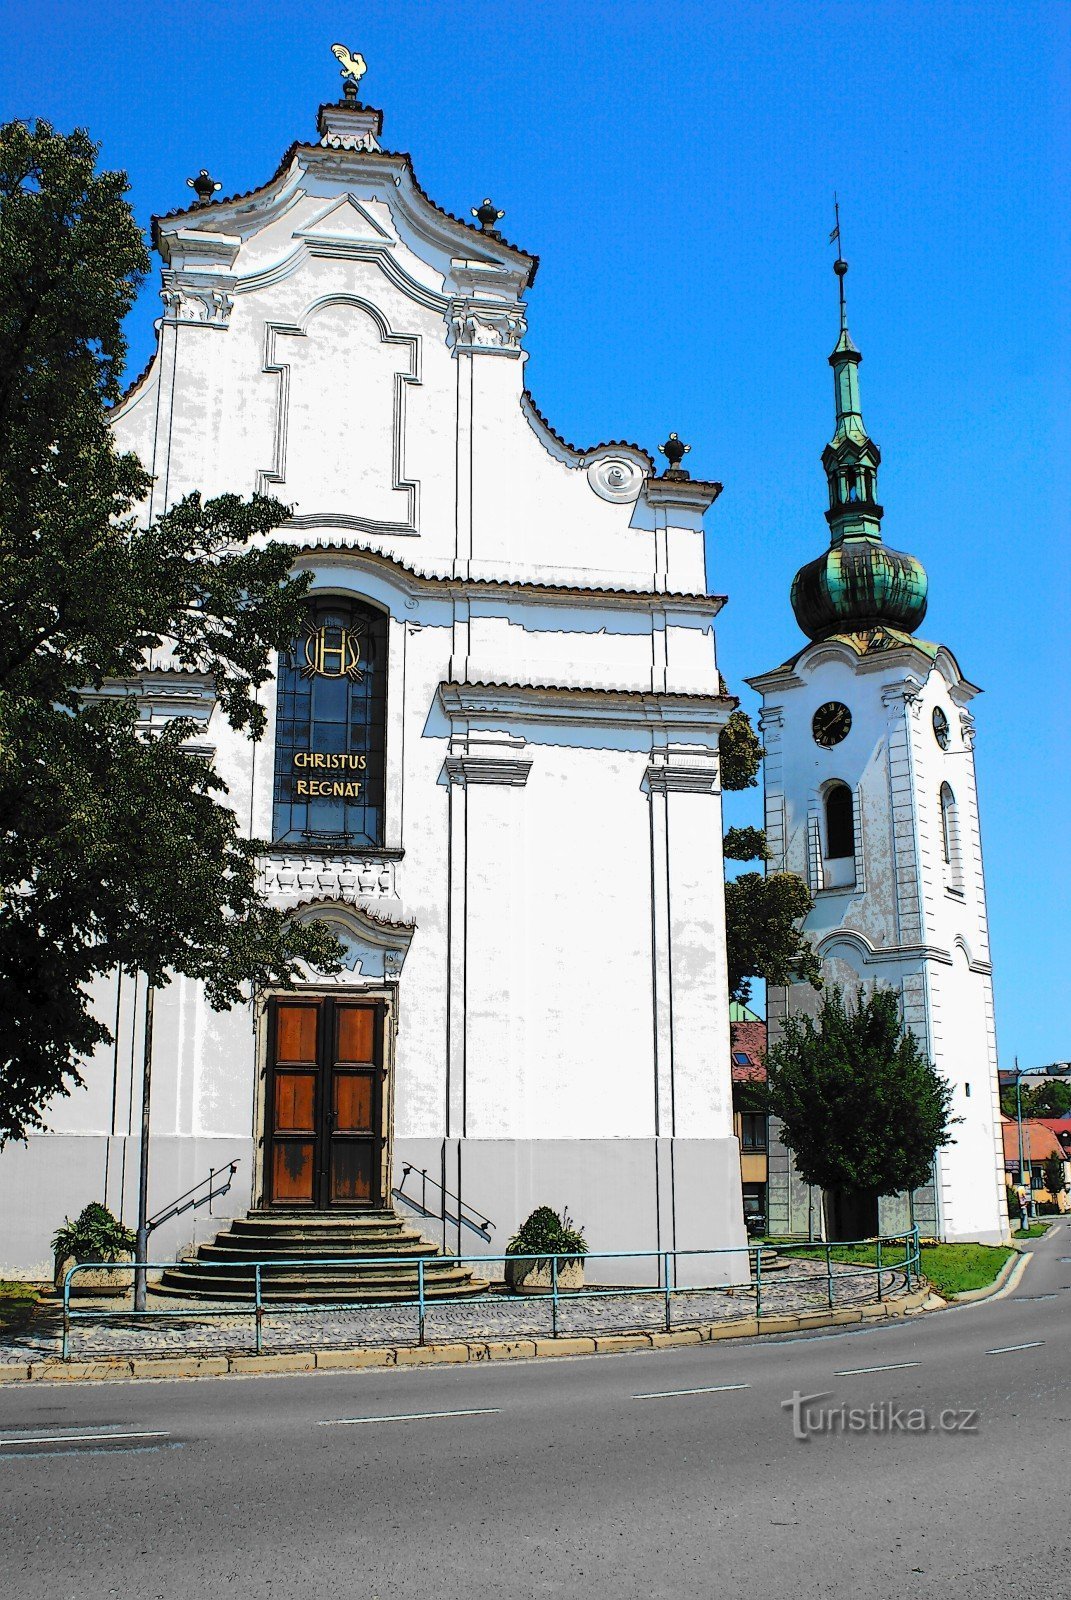 Pelhřimov – church of St. Welcome with bell ringing